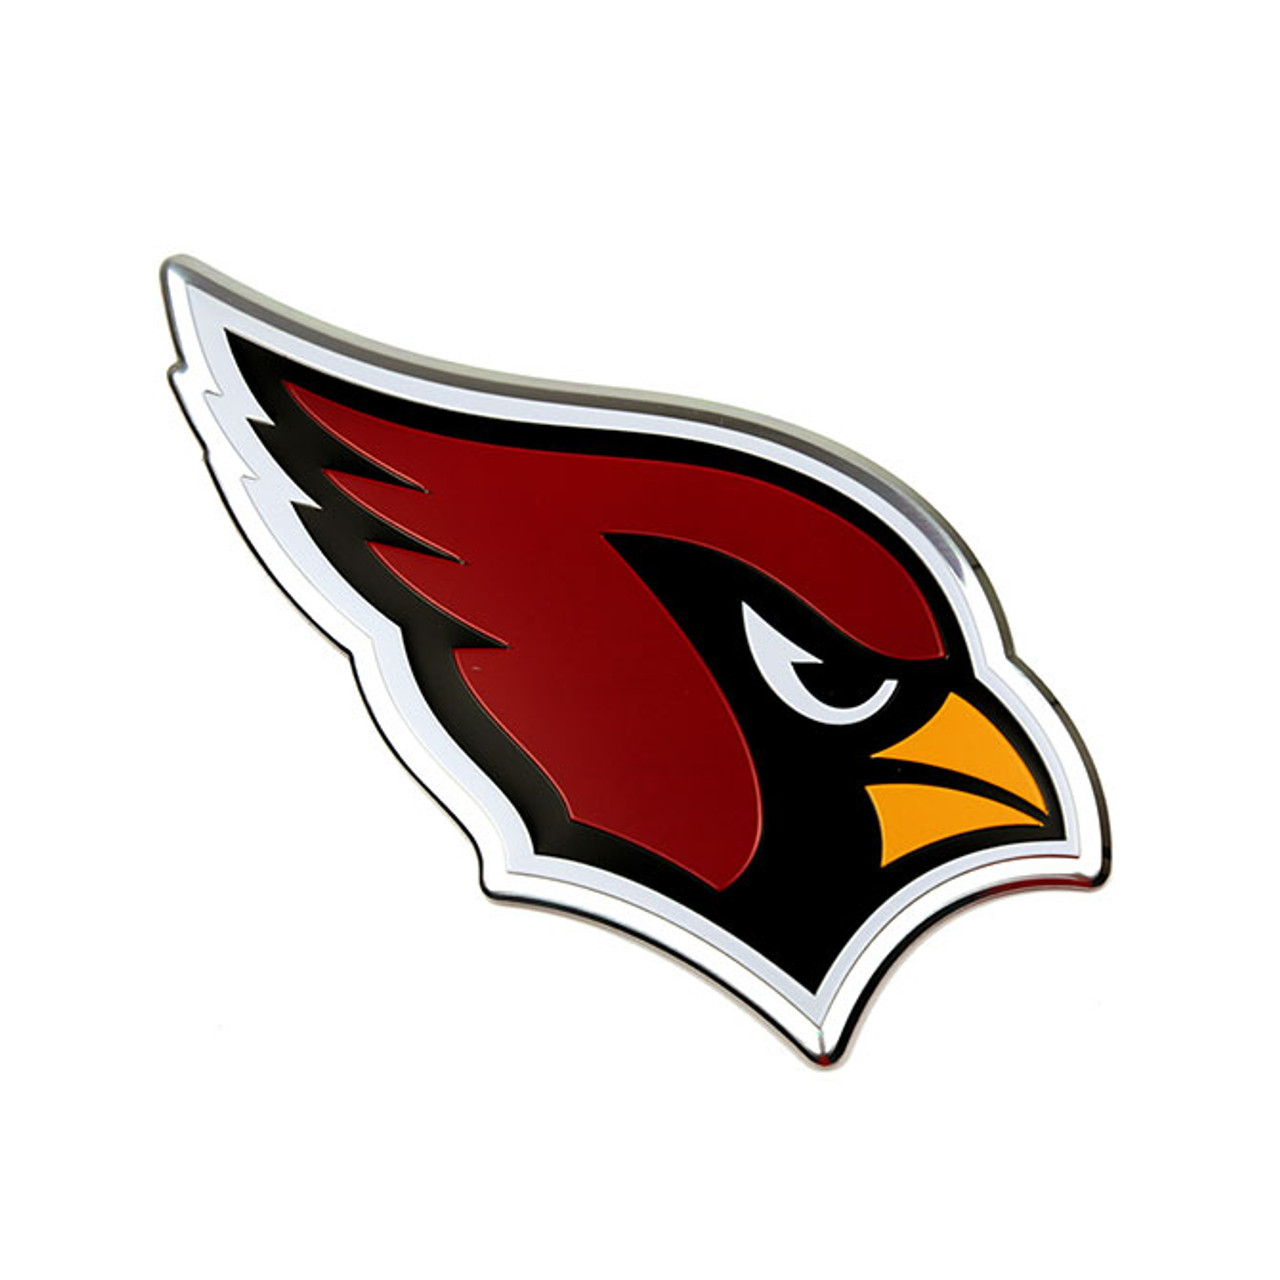 Official Arizona Cardinals Jewelry Accessories, Cardinals Earrings